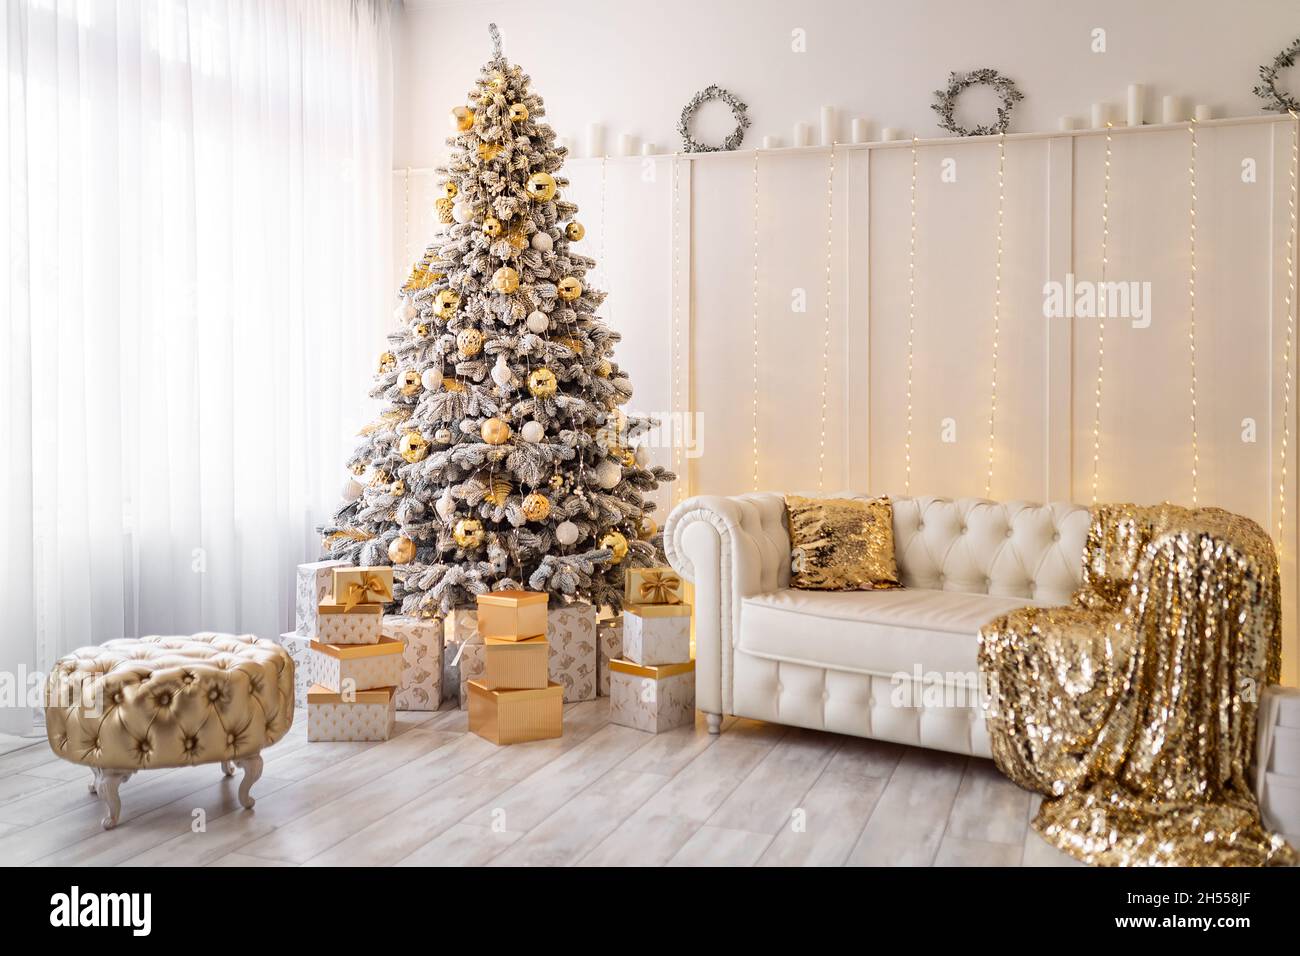 Classic Christmas Decorated Interior Room New Year Tree Silver Decorations  Stock Photo by ©Luljo 416297246